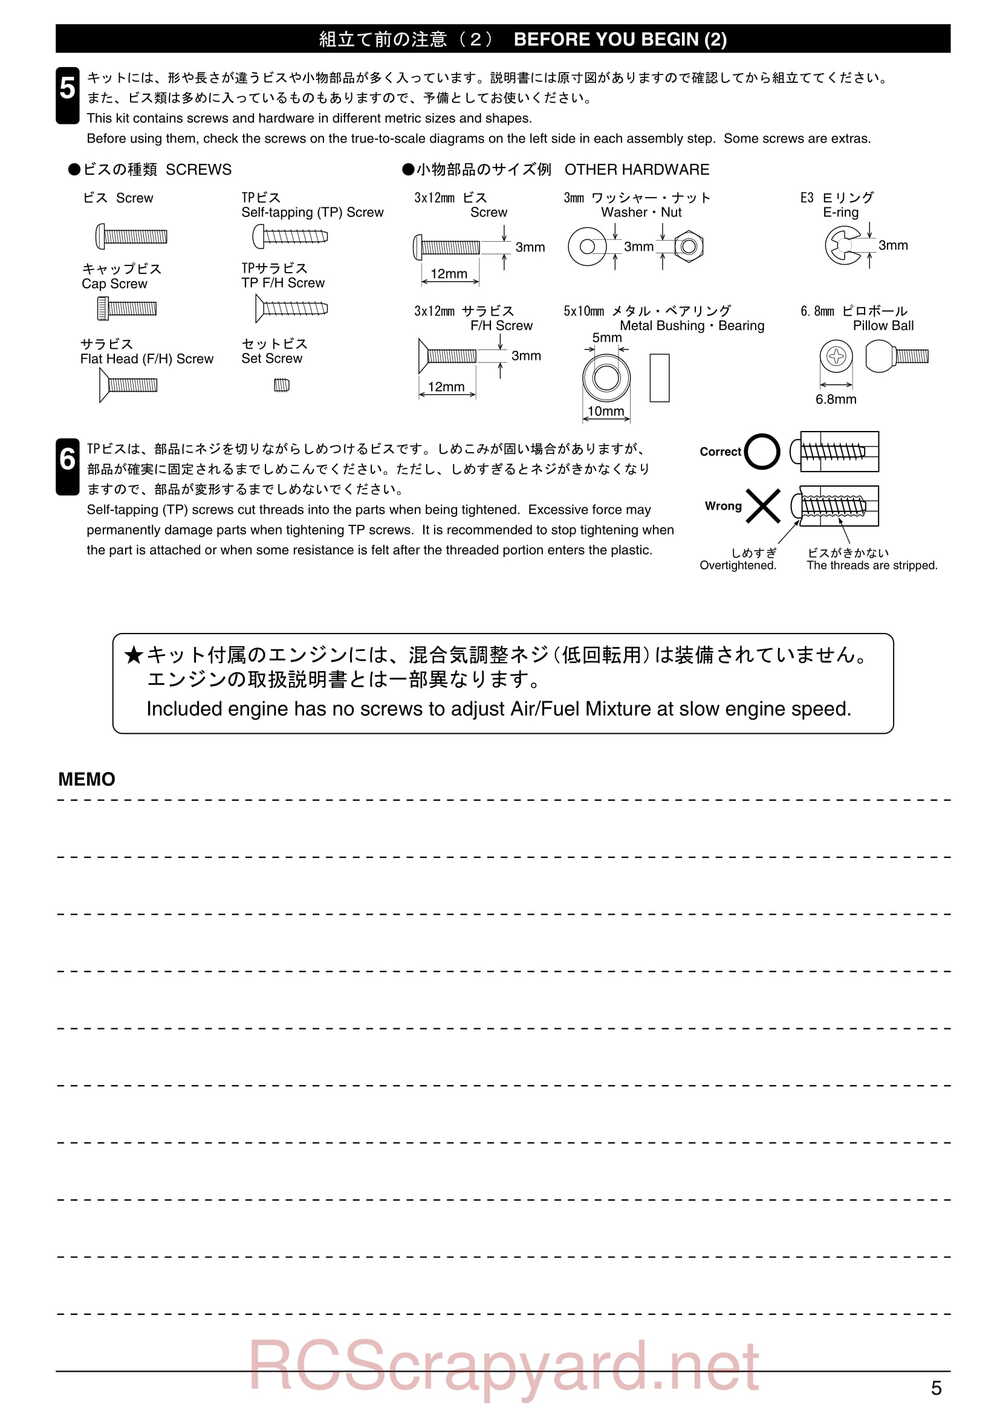 Kyosho - 31213 - TR-15 Monster-Touring - Manual - Page 05